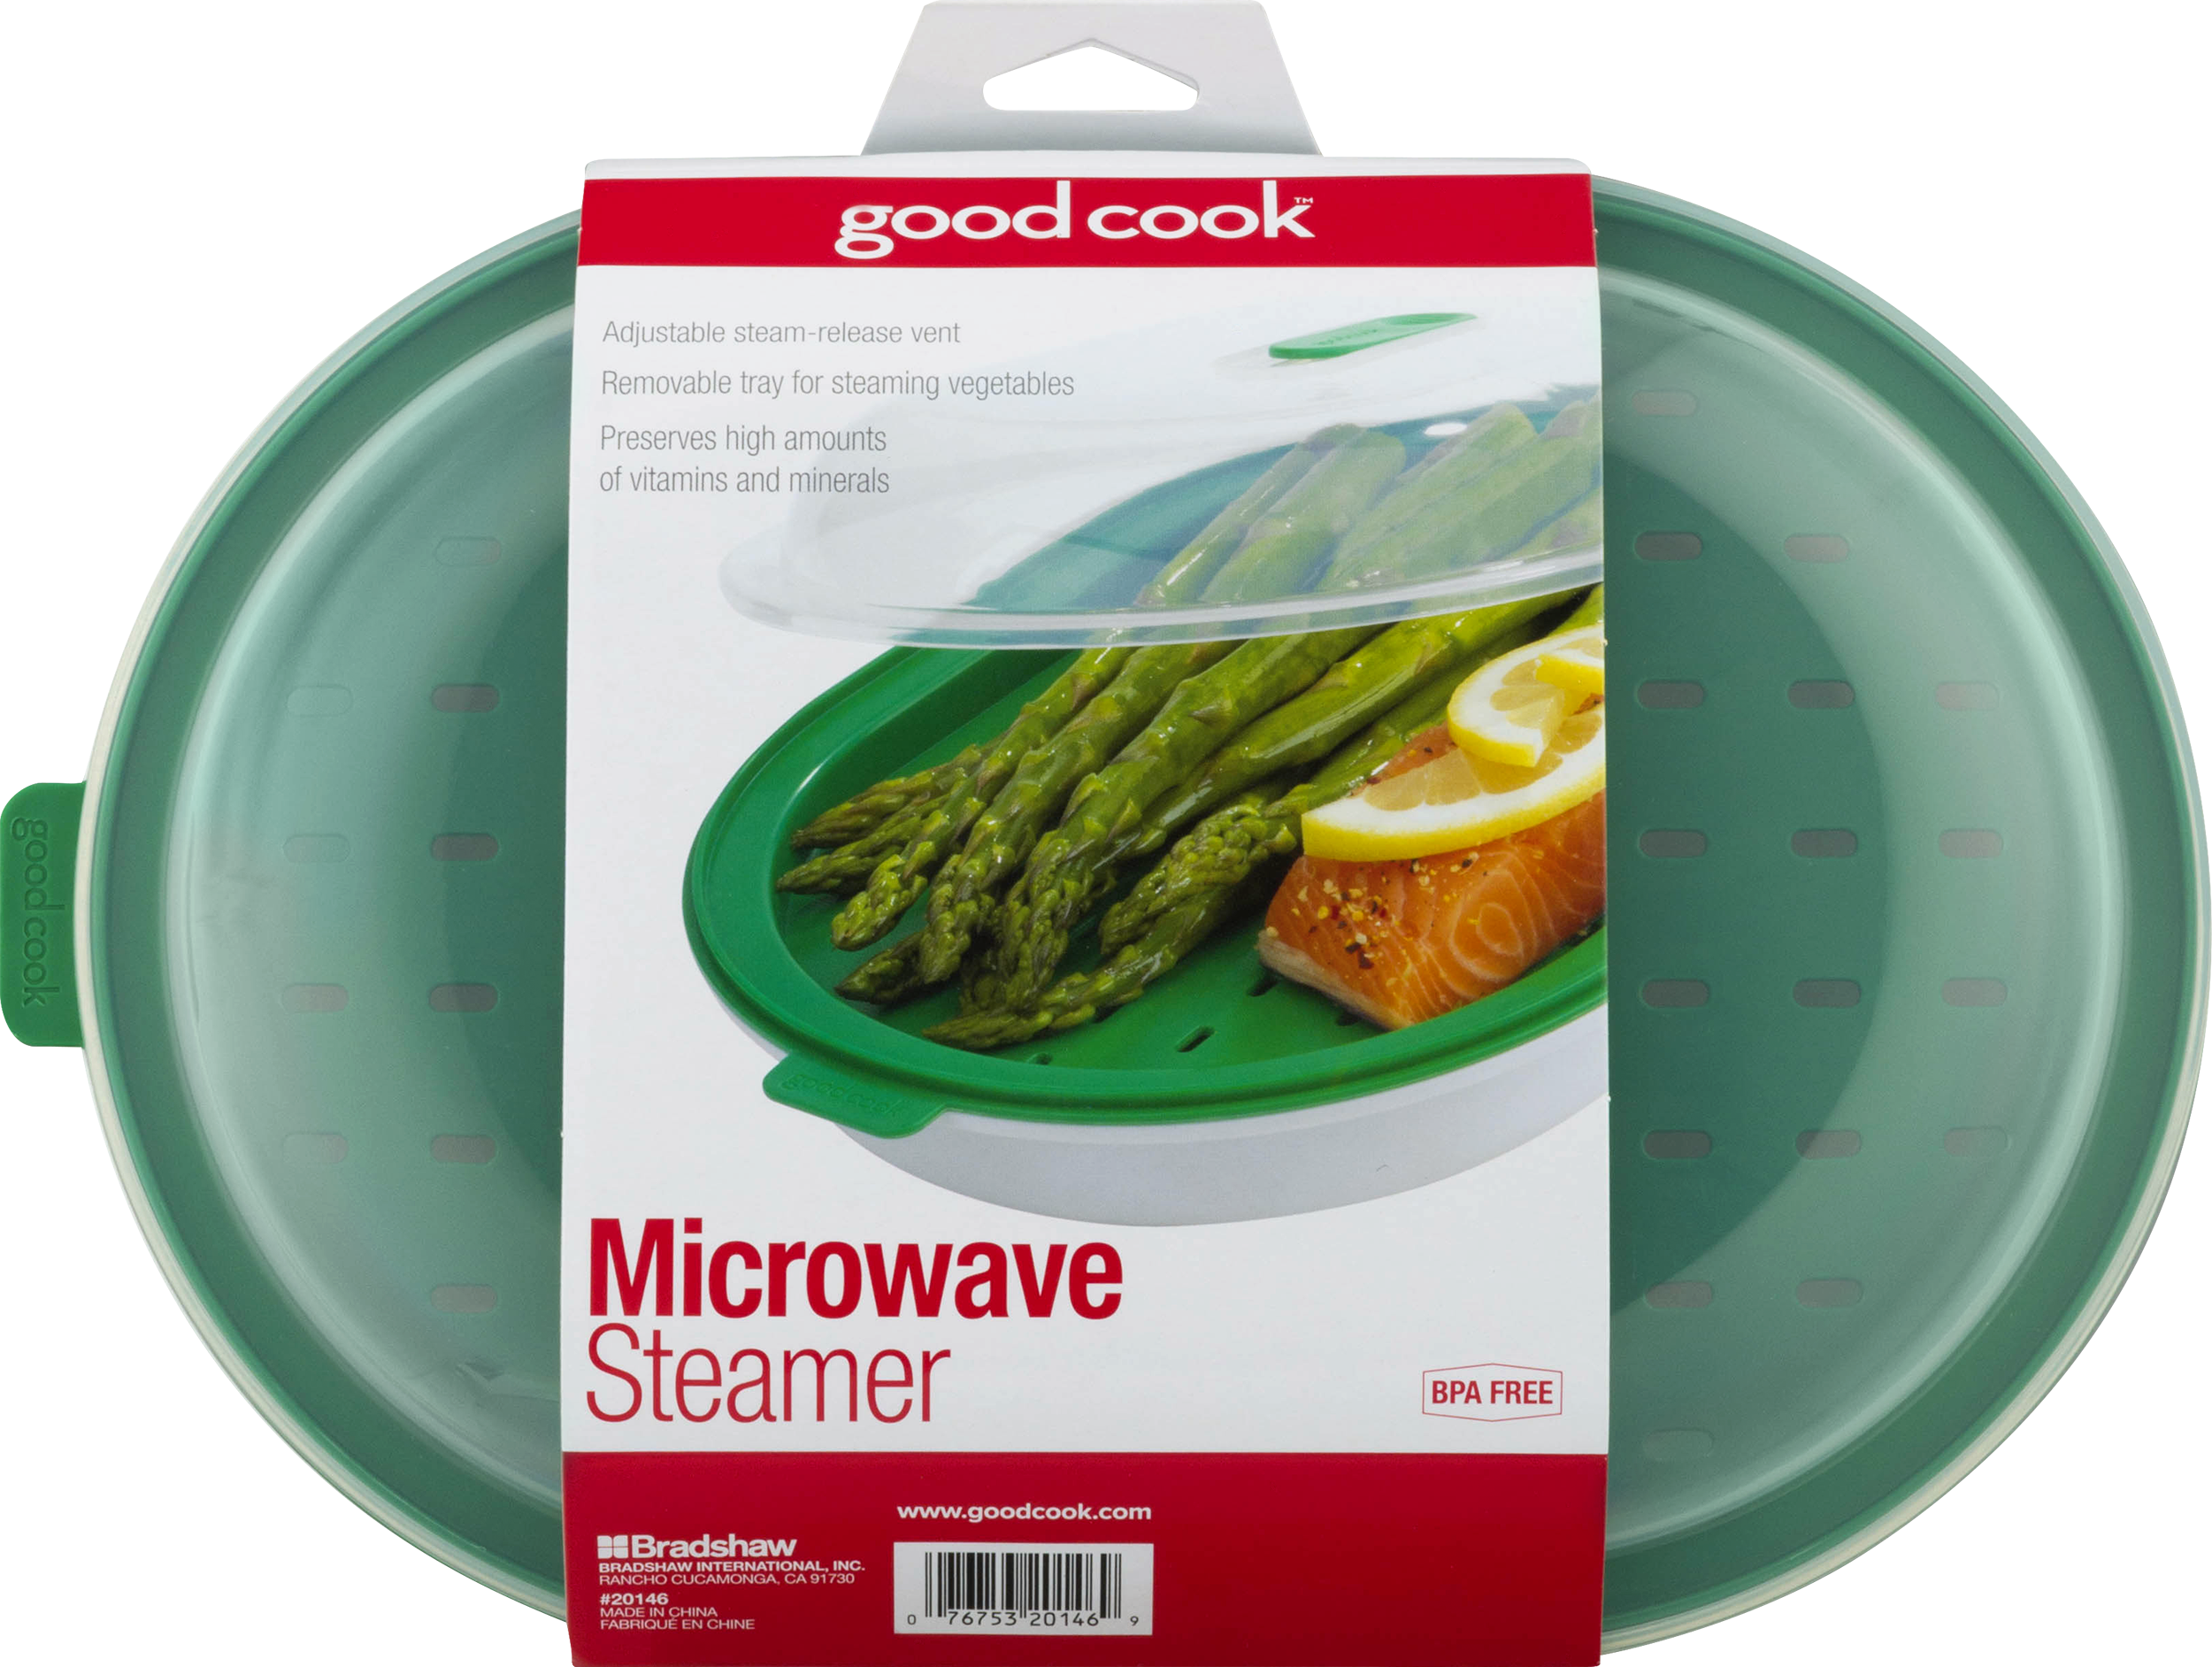 Good cook microwave steamer. Dishes clipart steamed vegetable